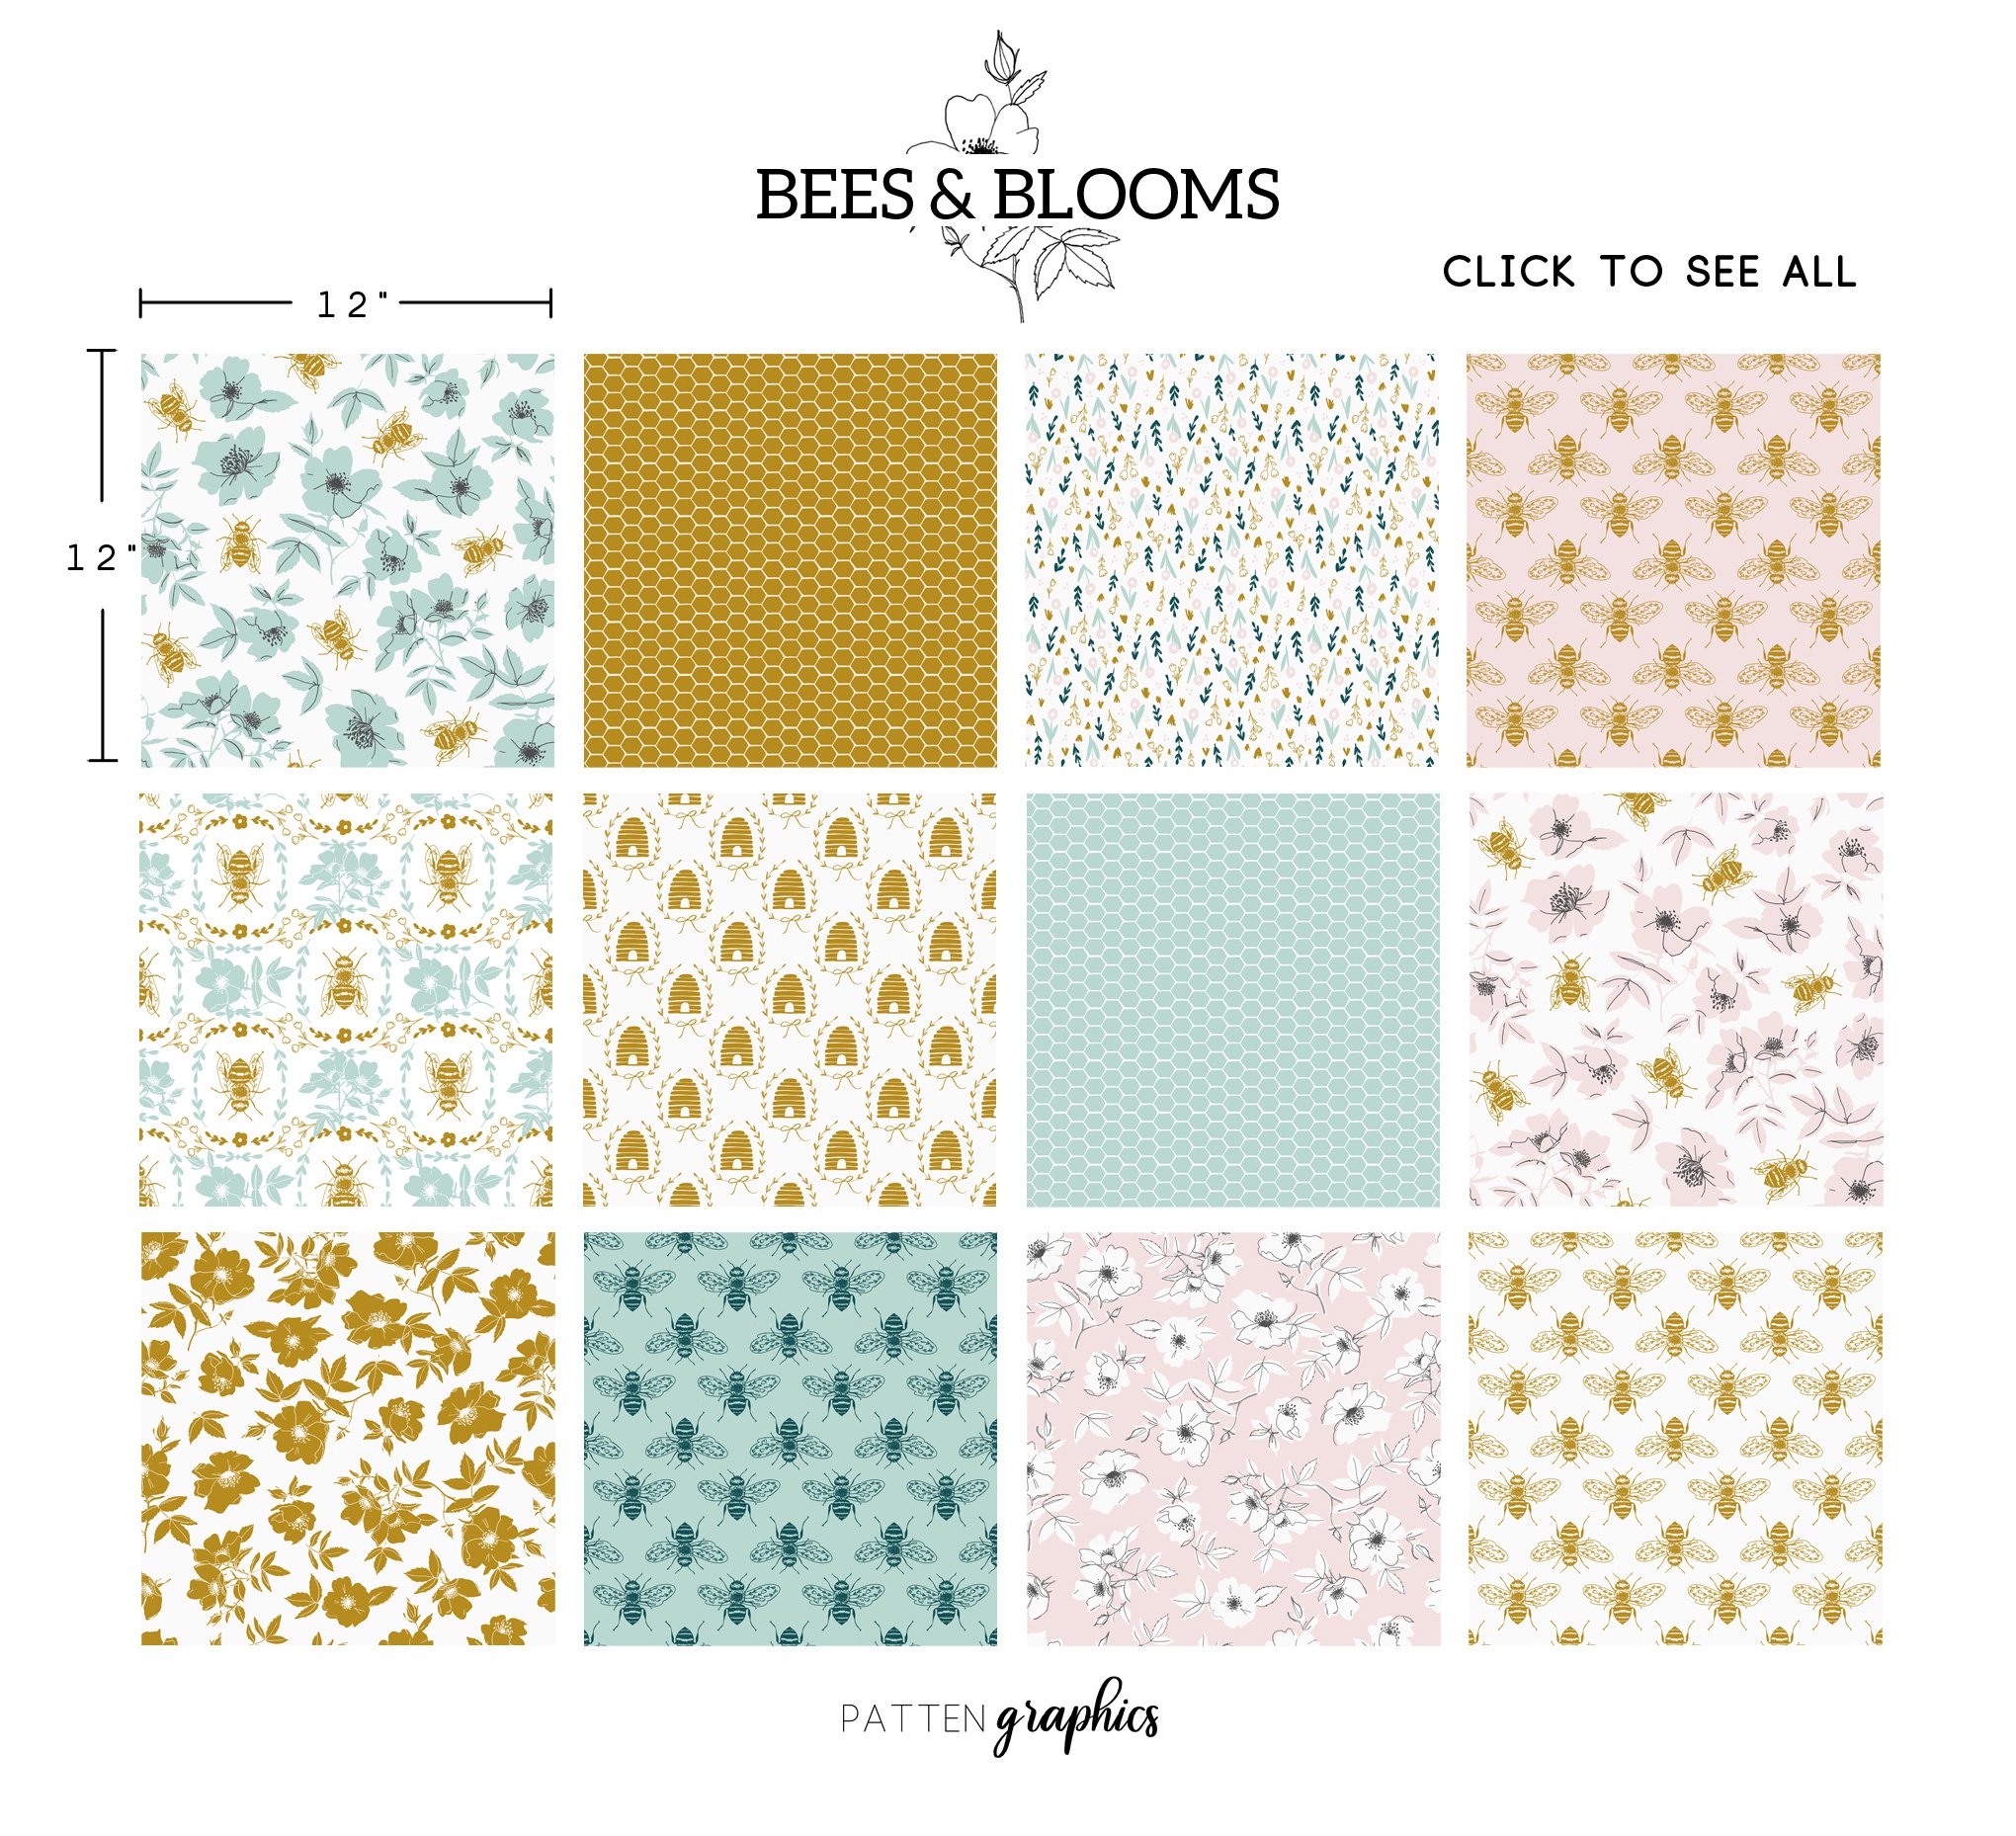 Bees & Blooms - Honeybees and Roses preview image.